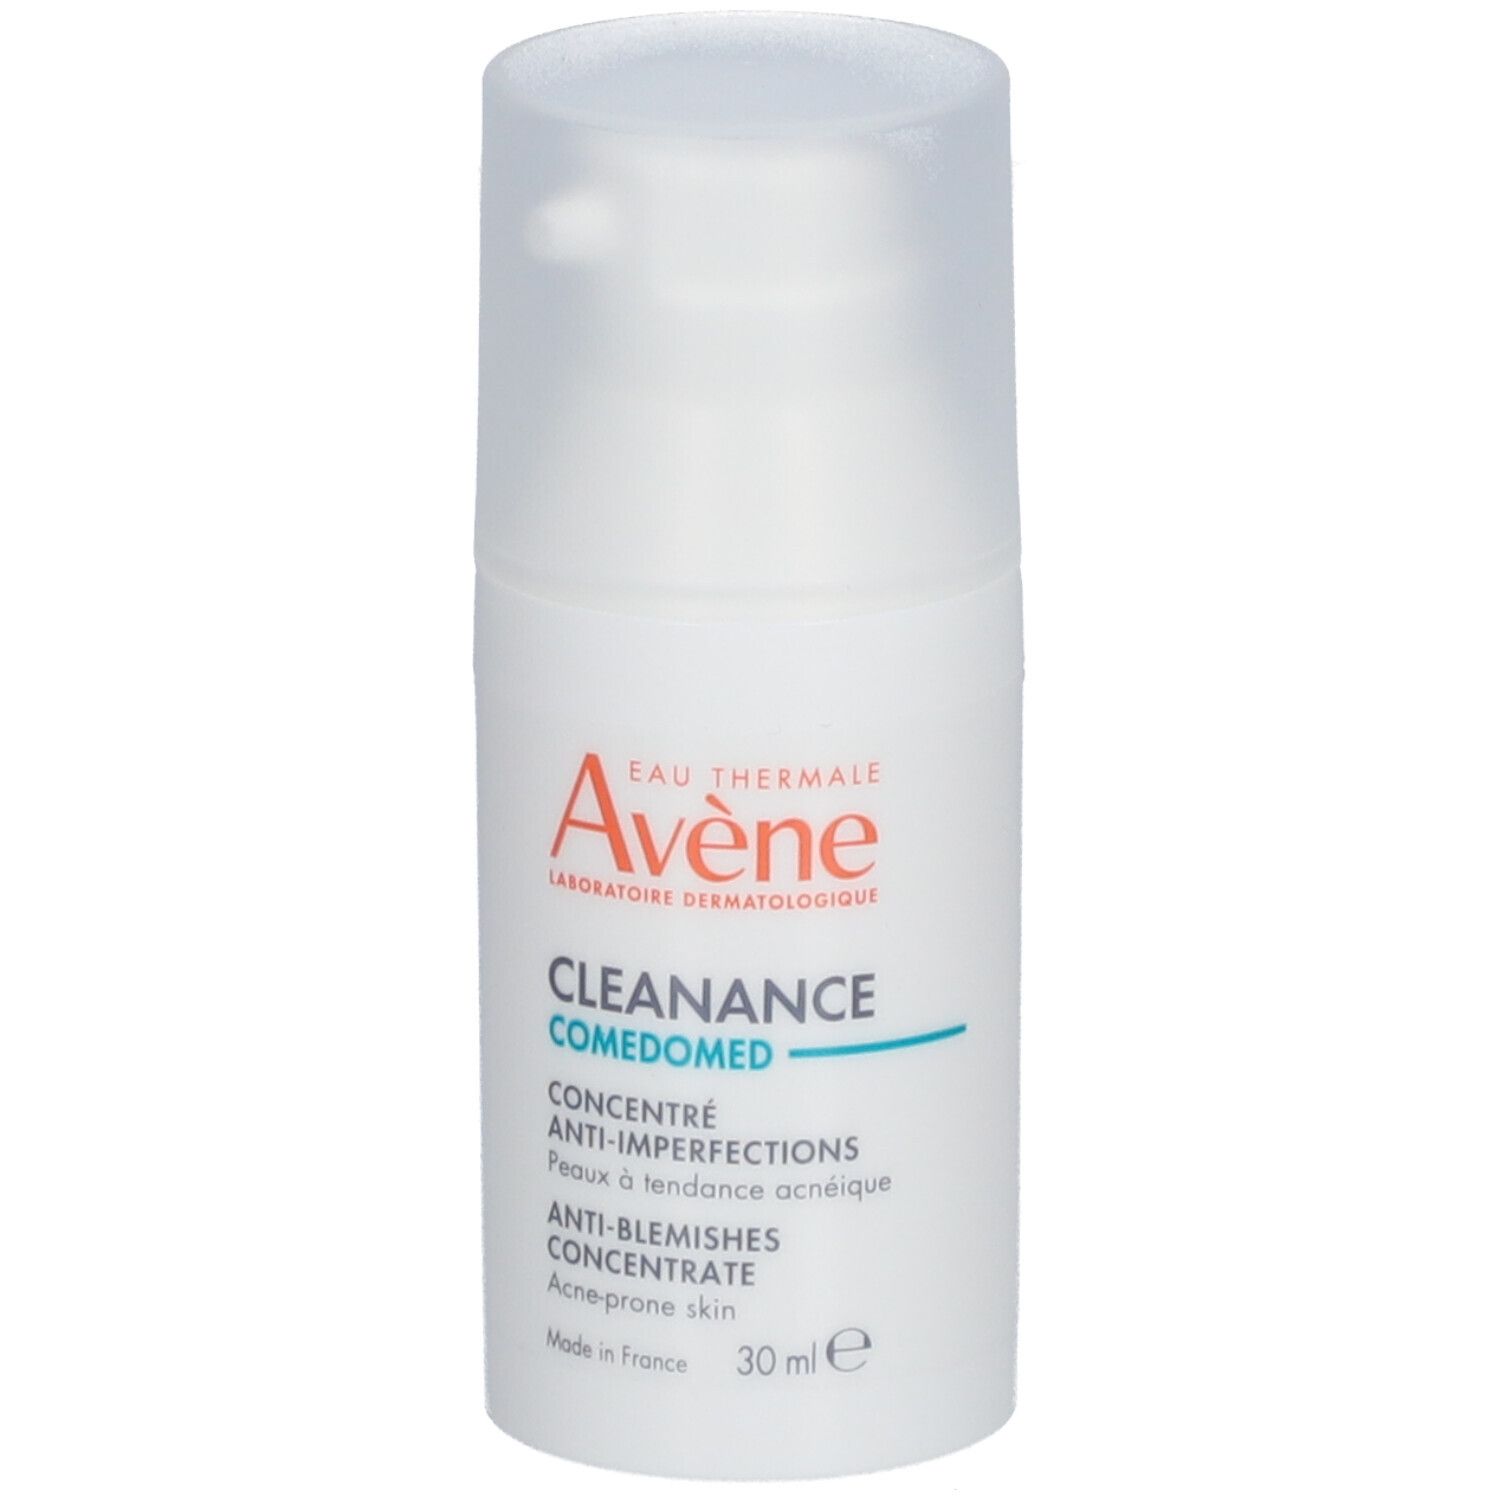 Avène Cleanance Comedomed Concentré Anti-imperfections